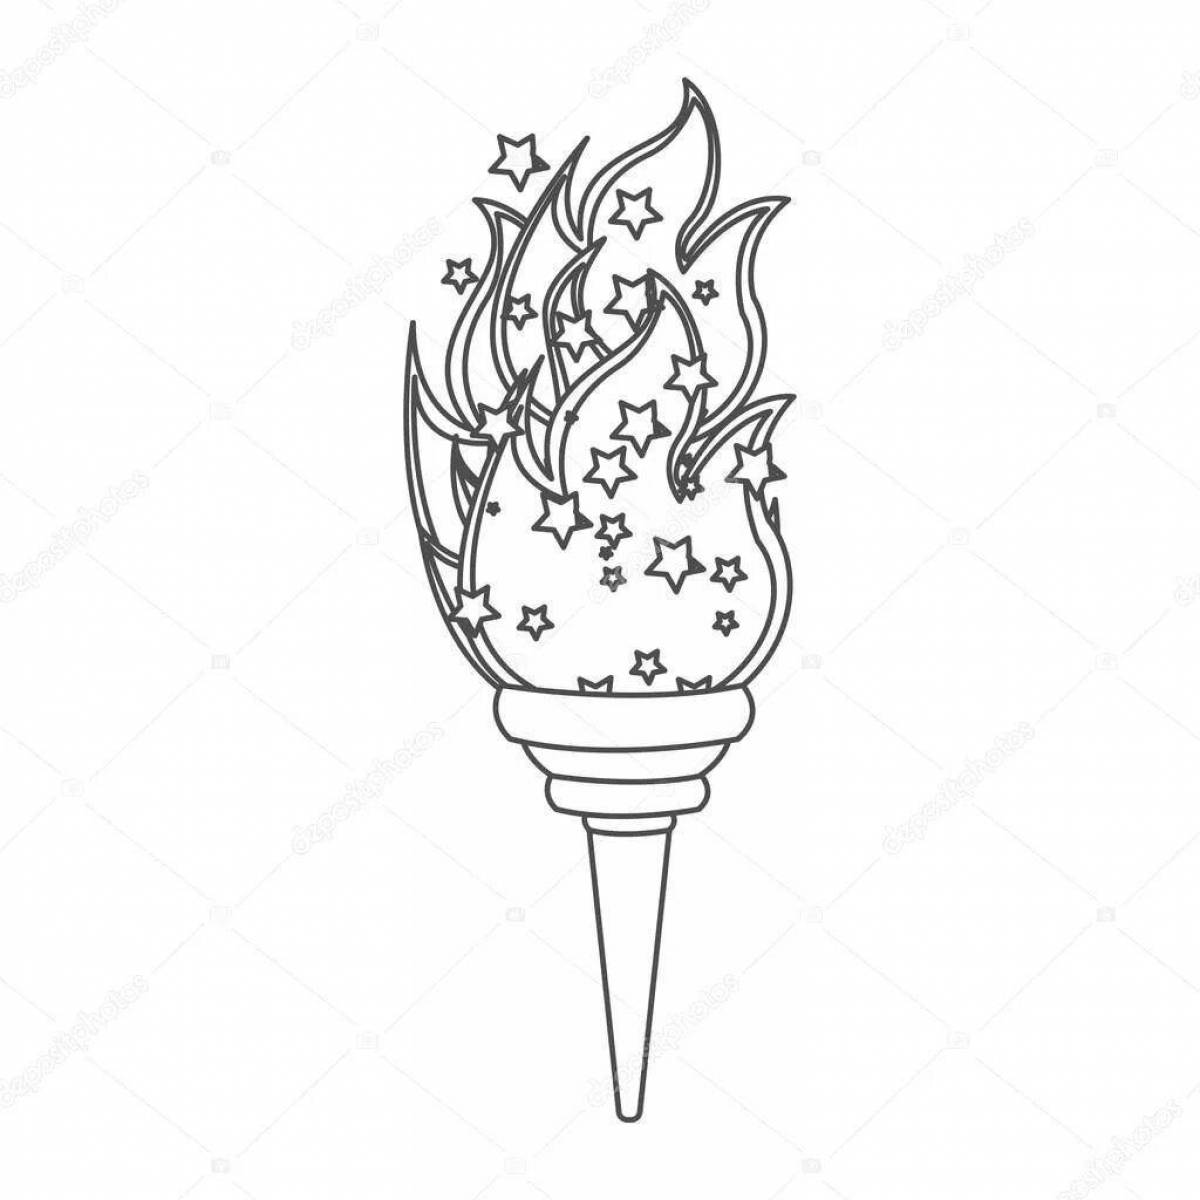 Exquisite olympic torch coloring page